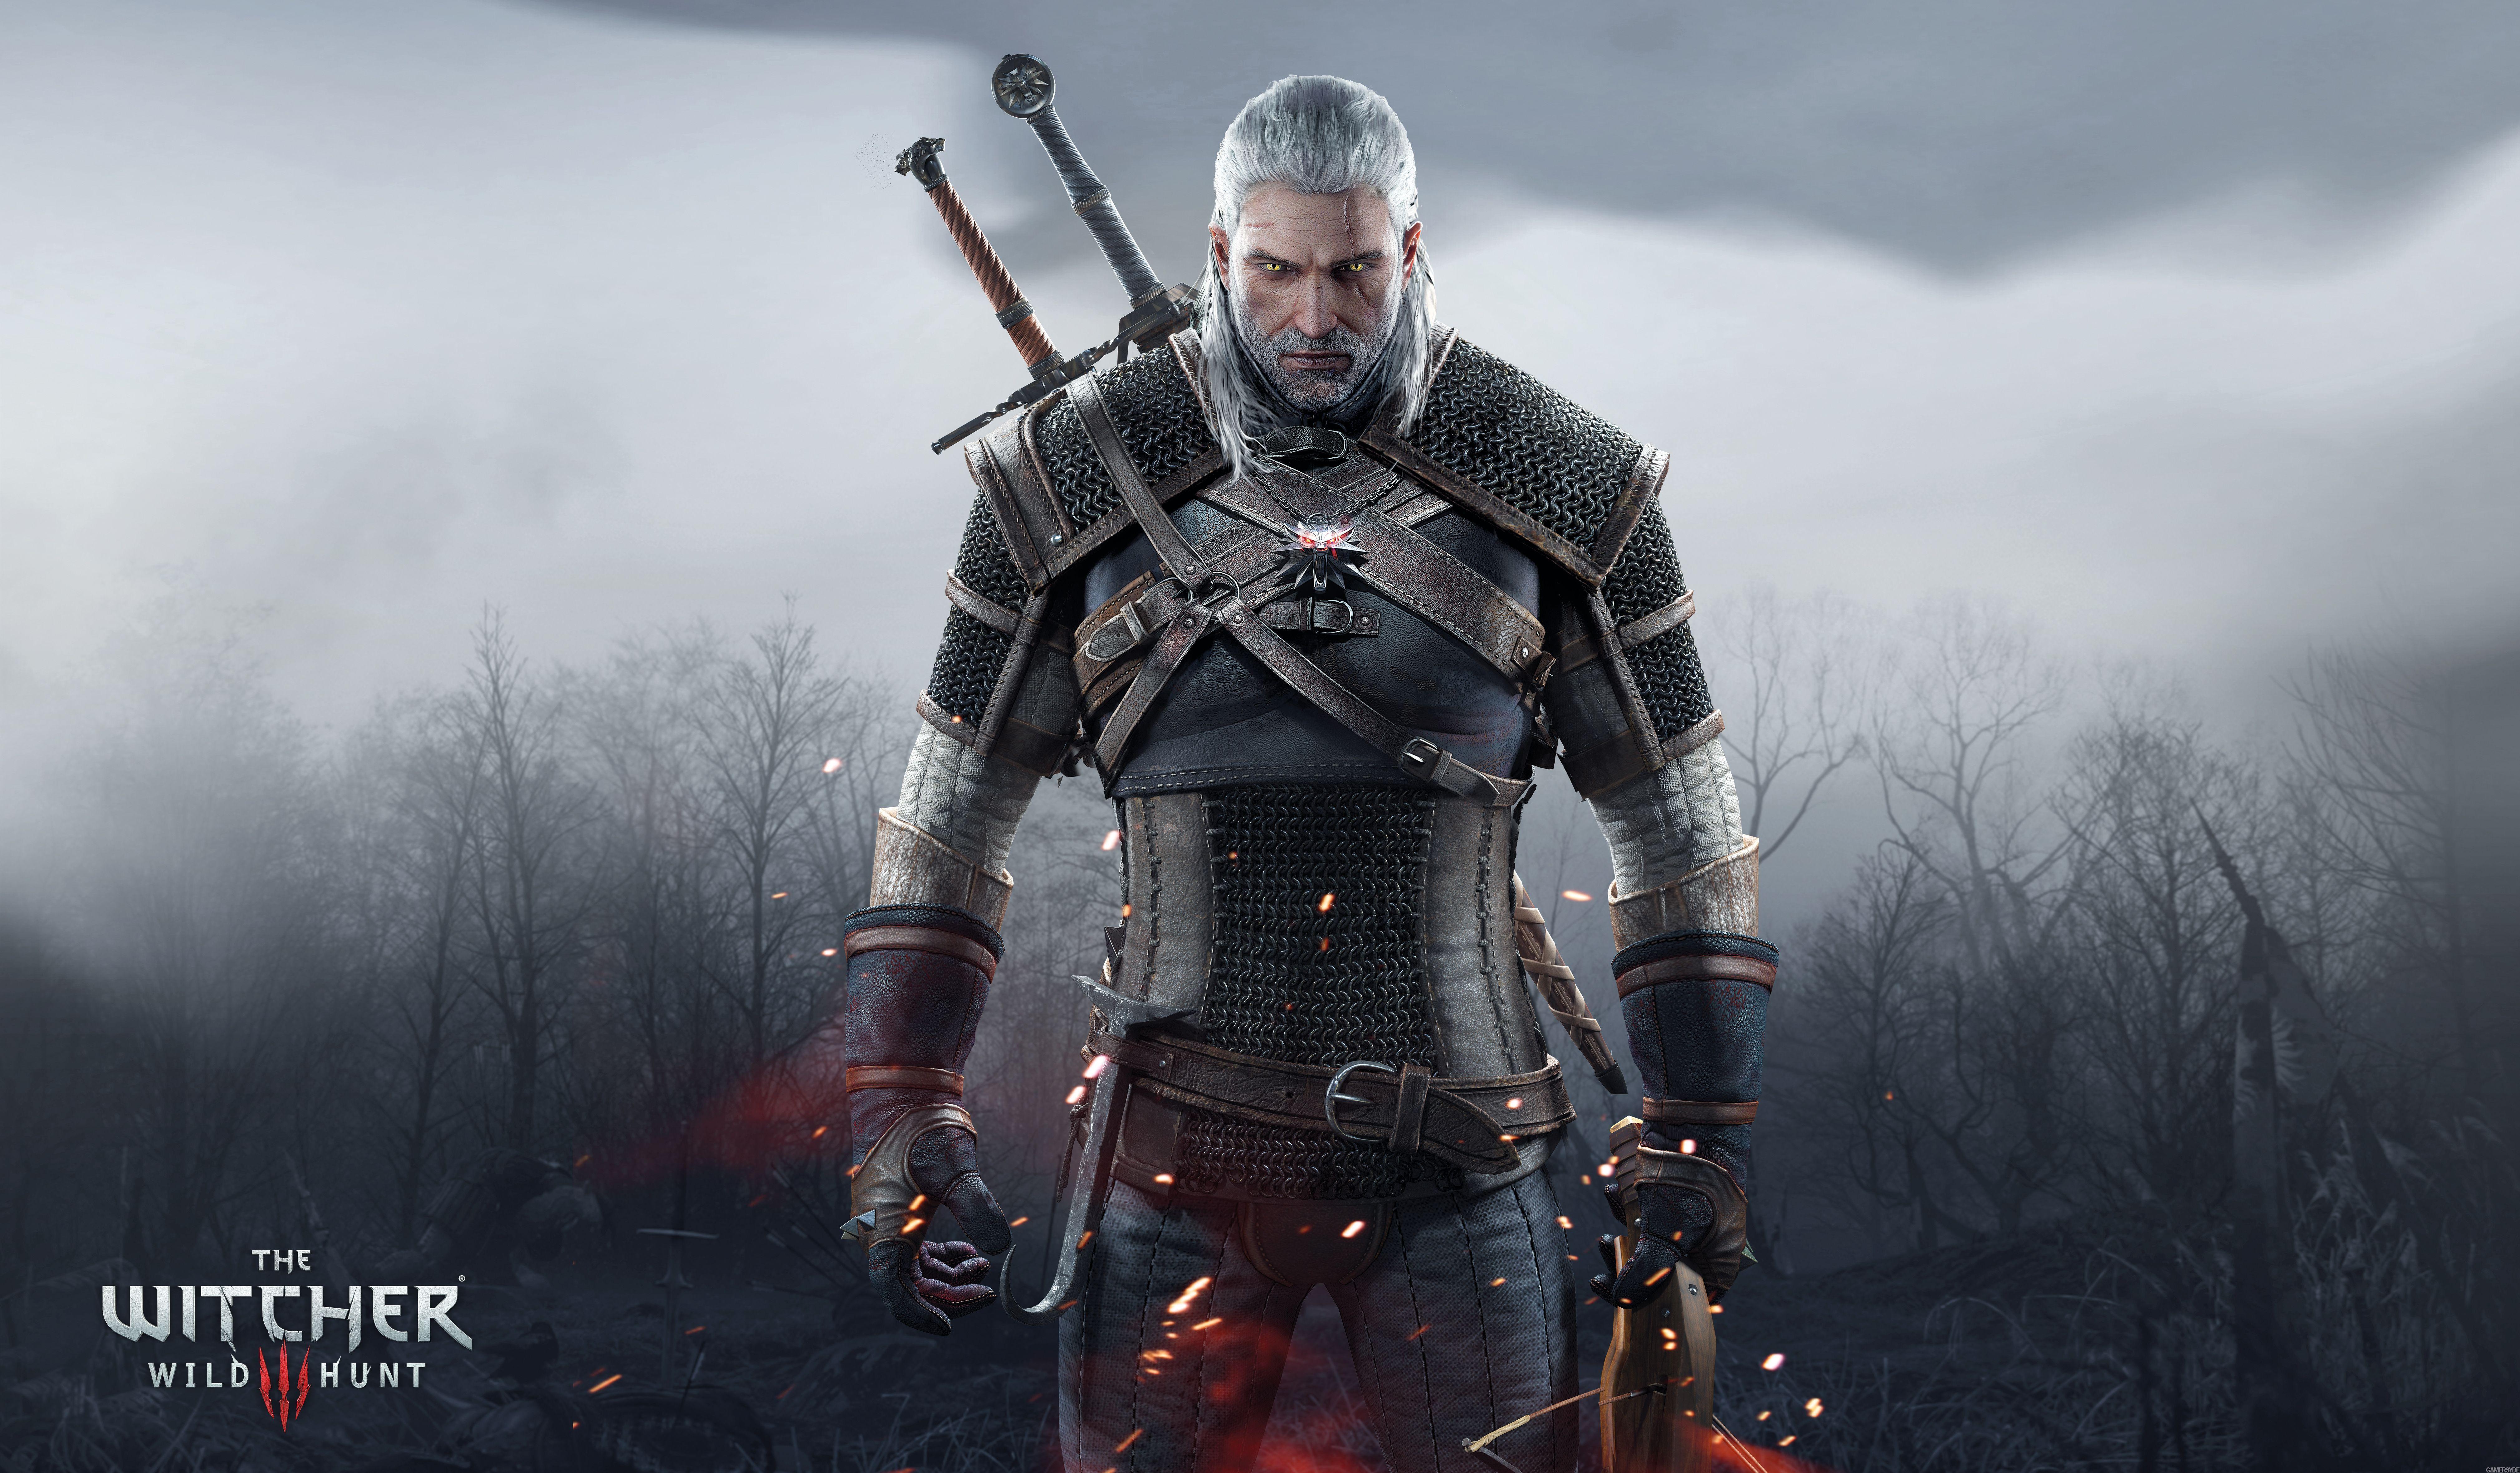 The Witcher 3: Wild Hunt HD Wallpaper. Background